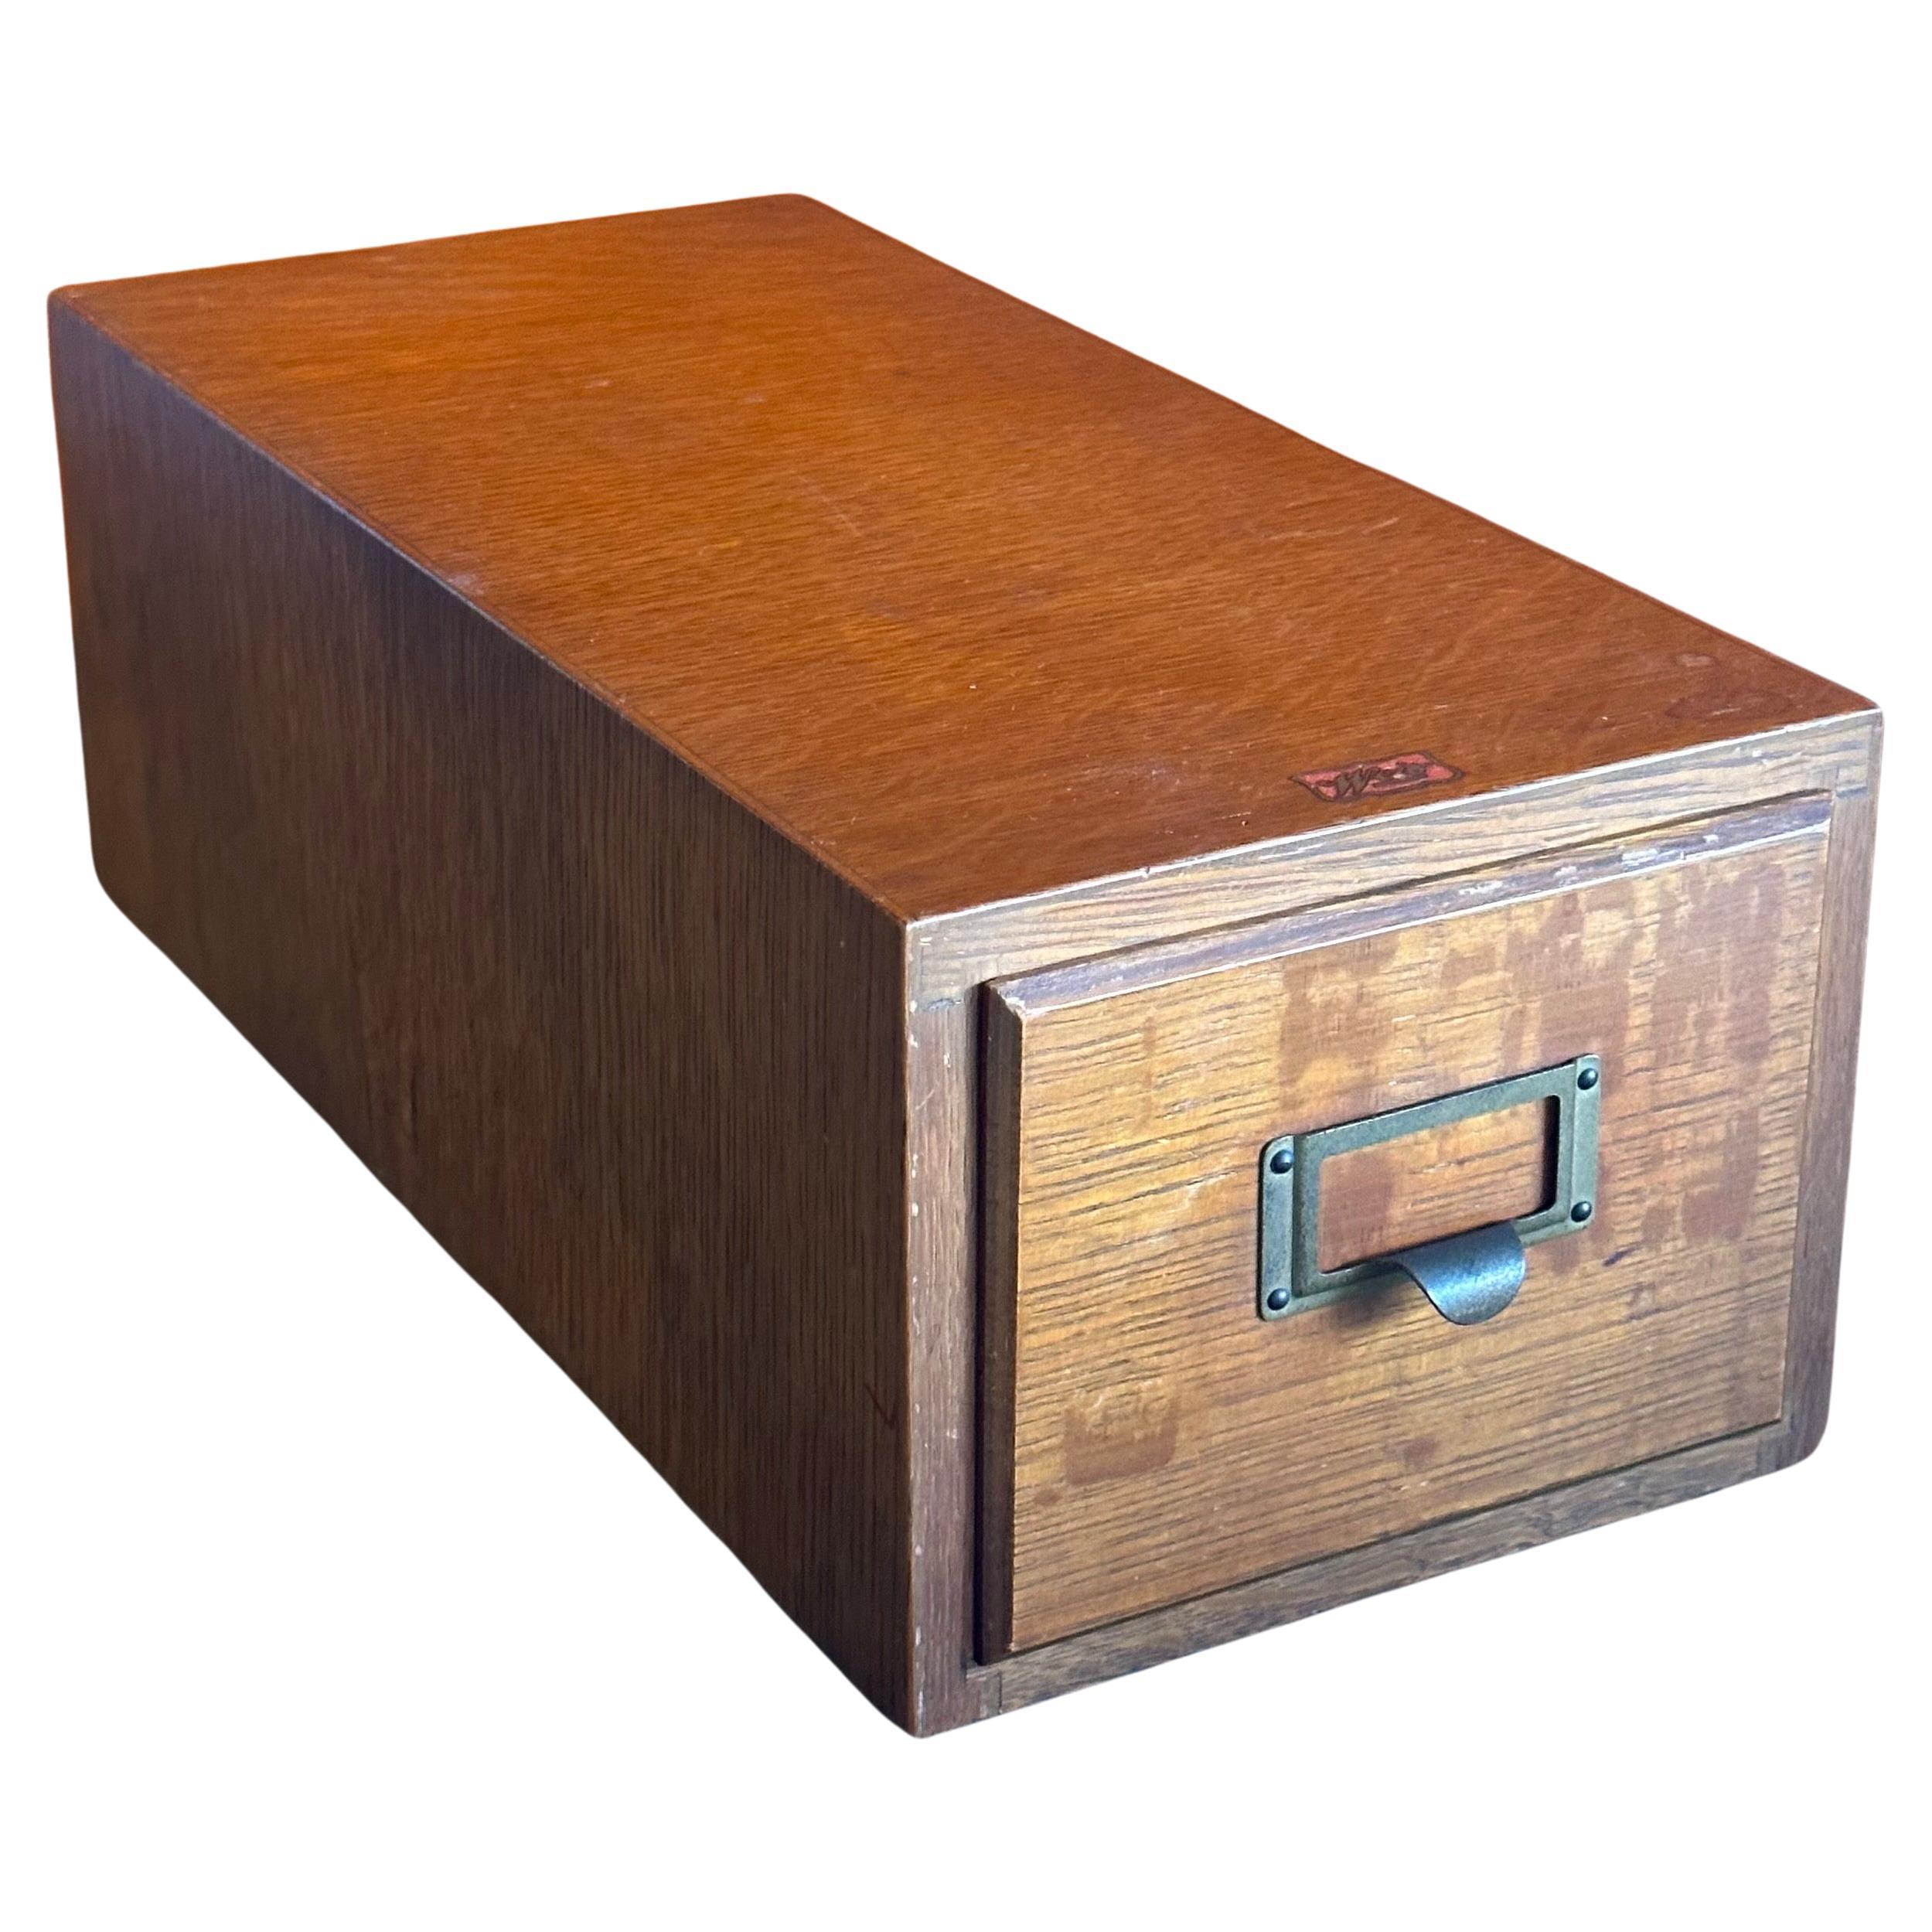 A solid tiger oak single card catalog box with brass handle by Weis, circa 1940s This solid oak cabinet is constructed with gorgeous dovetail joints, a finished backside and a solid brass handle.  The piece is in very good vintage condition and